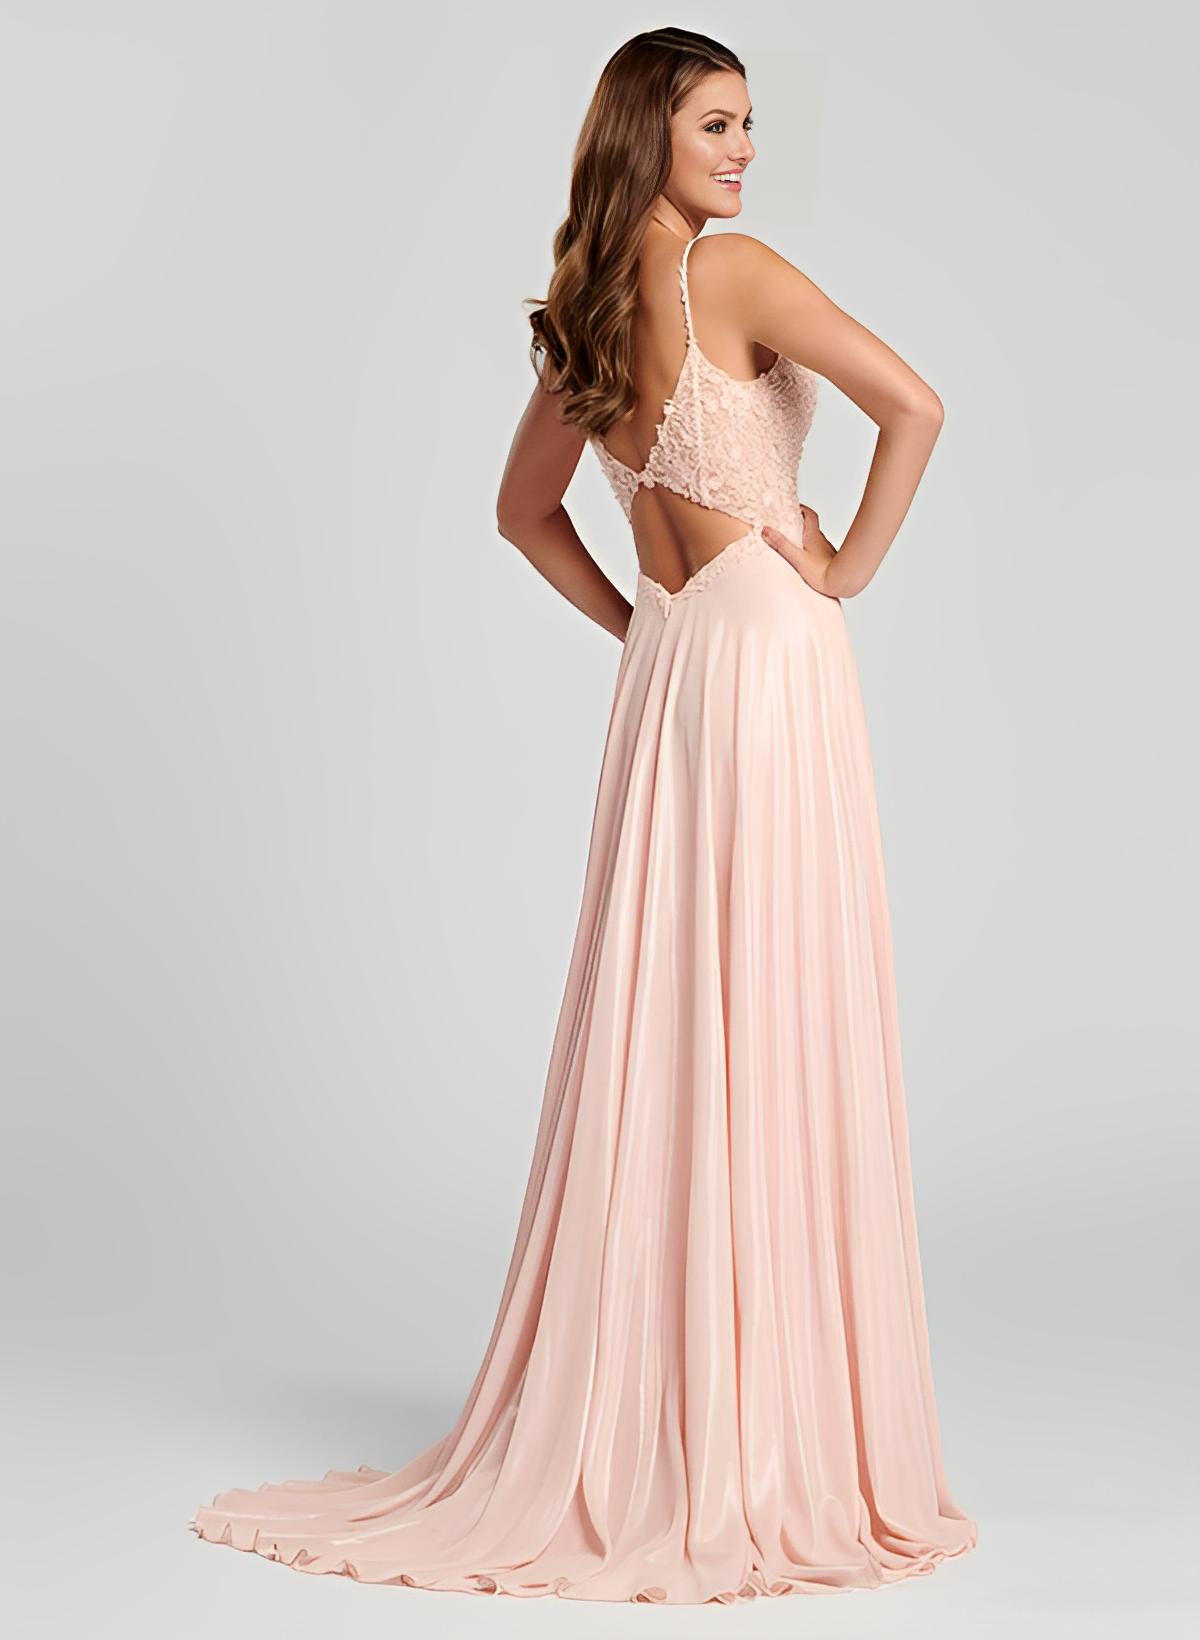 A-Line V-Neck Sleeveless Chiffon Floor-Length Evening Dresses With Lace Back Hole Split Front